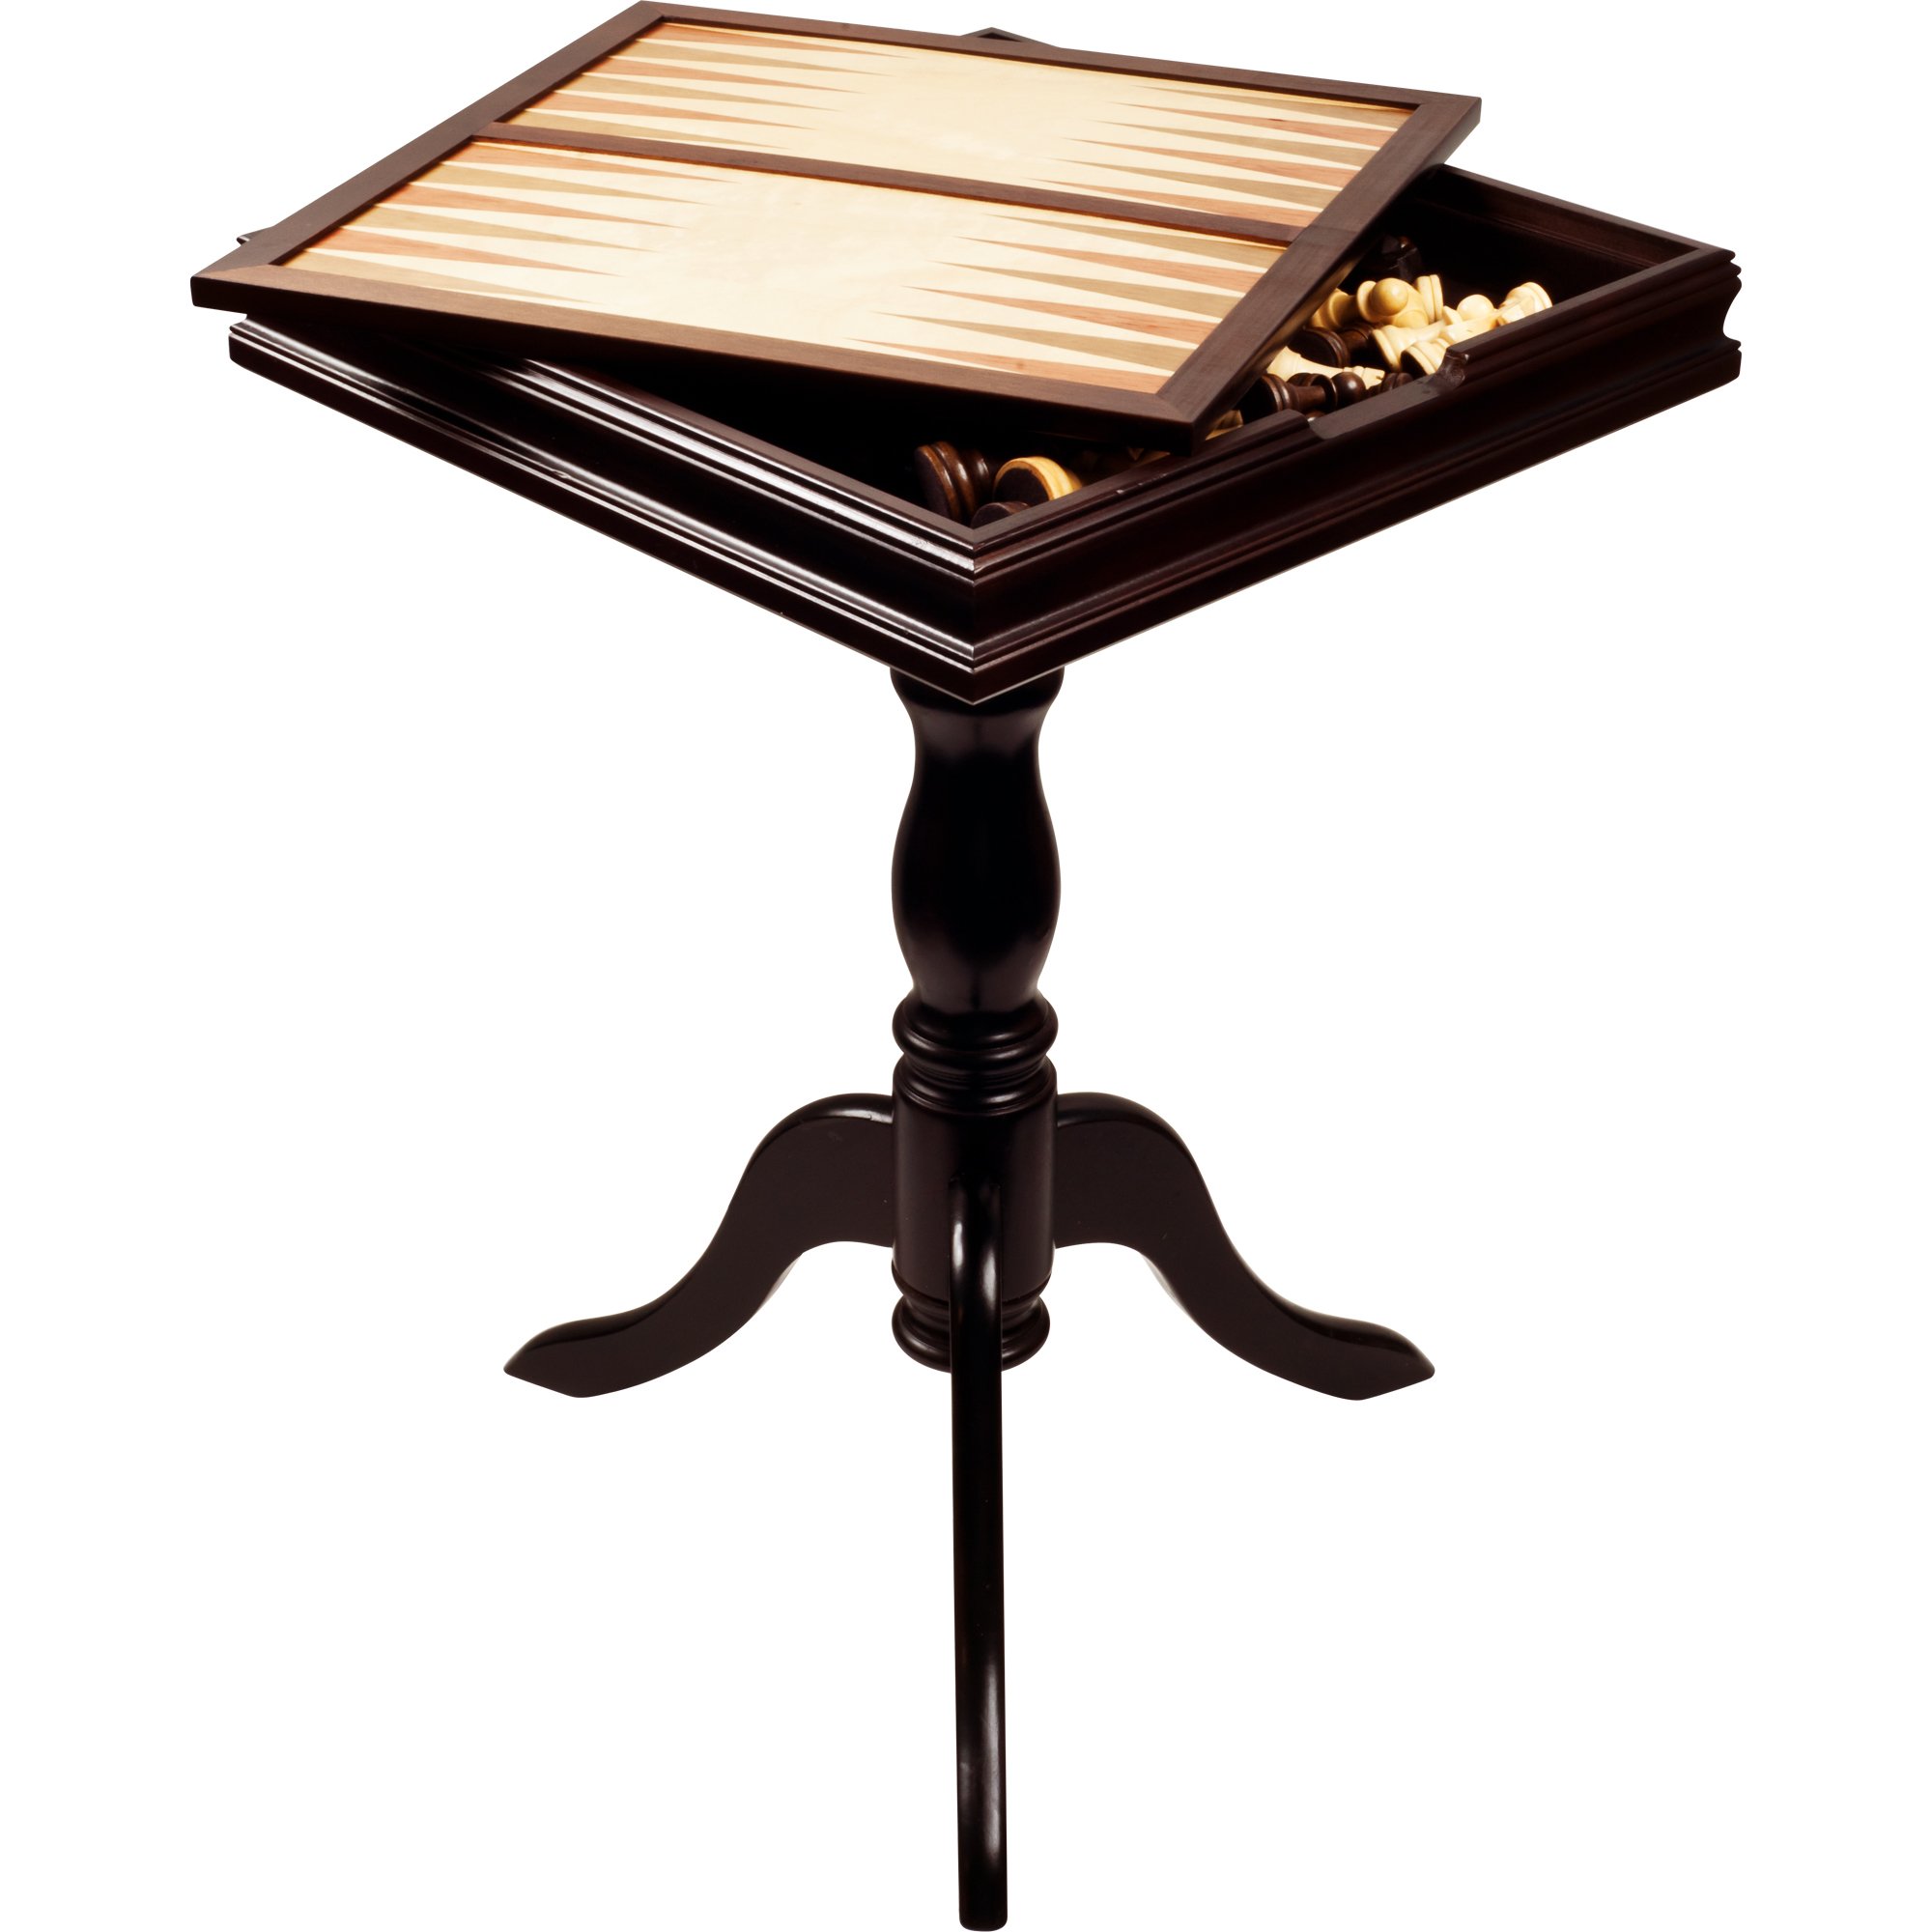 Hey! Play! Deluxe Chess & Backgammon Table by Trademark Games, Brown/White/Tan, 27x18.125x18.125